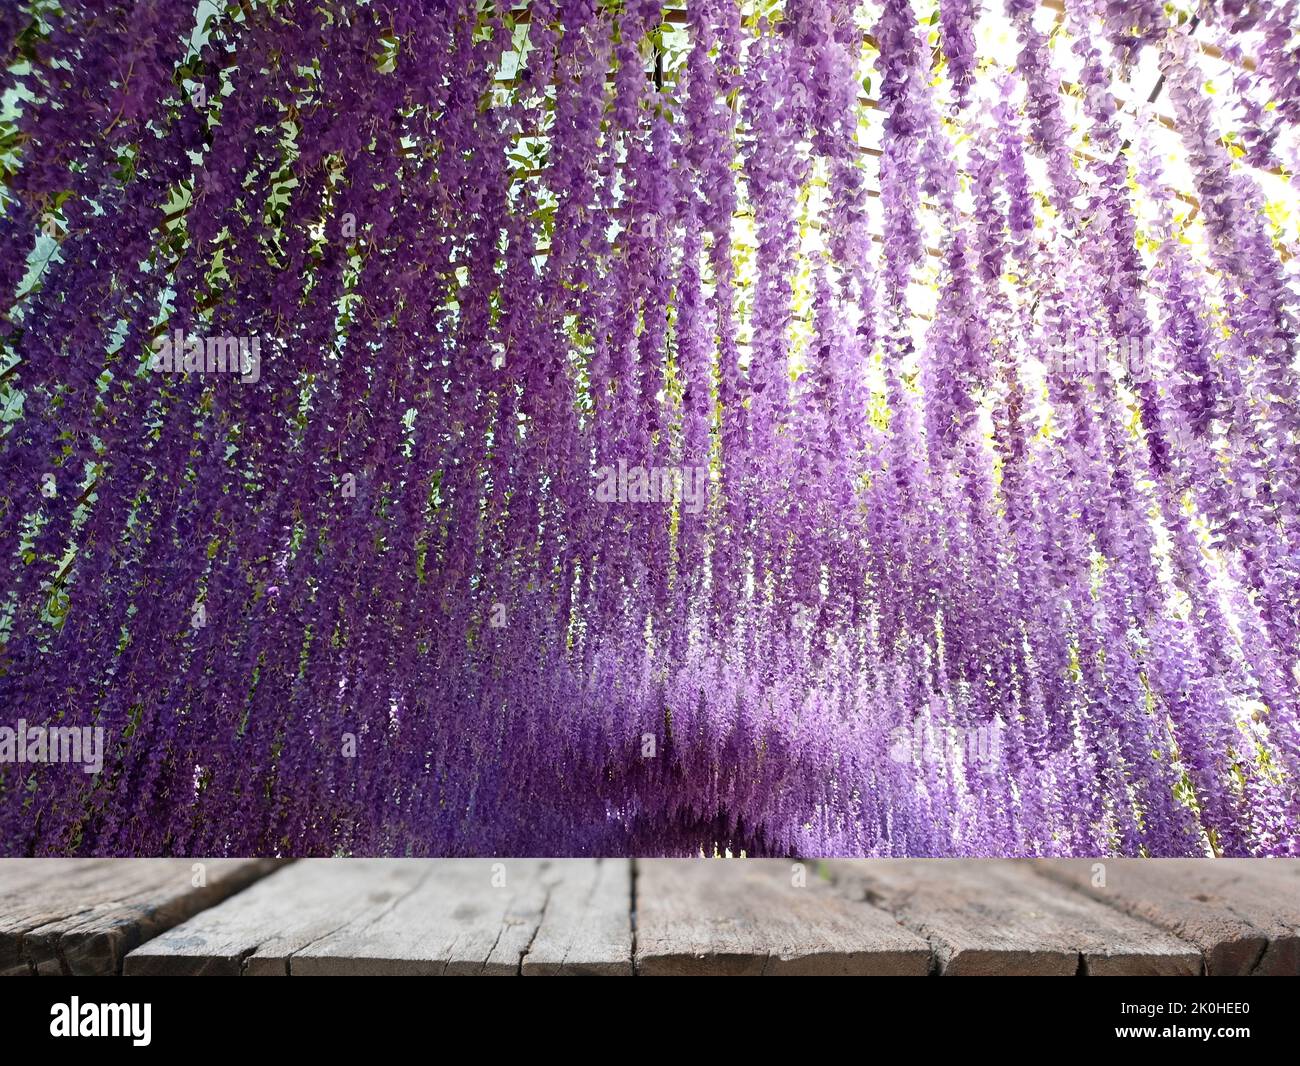 blurry hanging purple flower tunnel with wooden table for display product Stock Photo